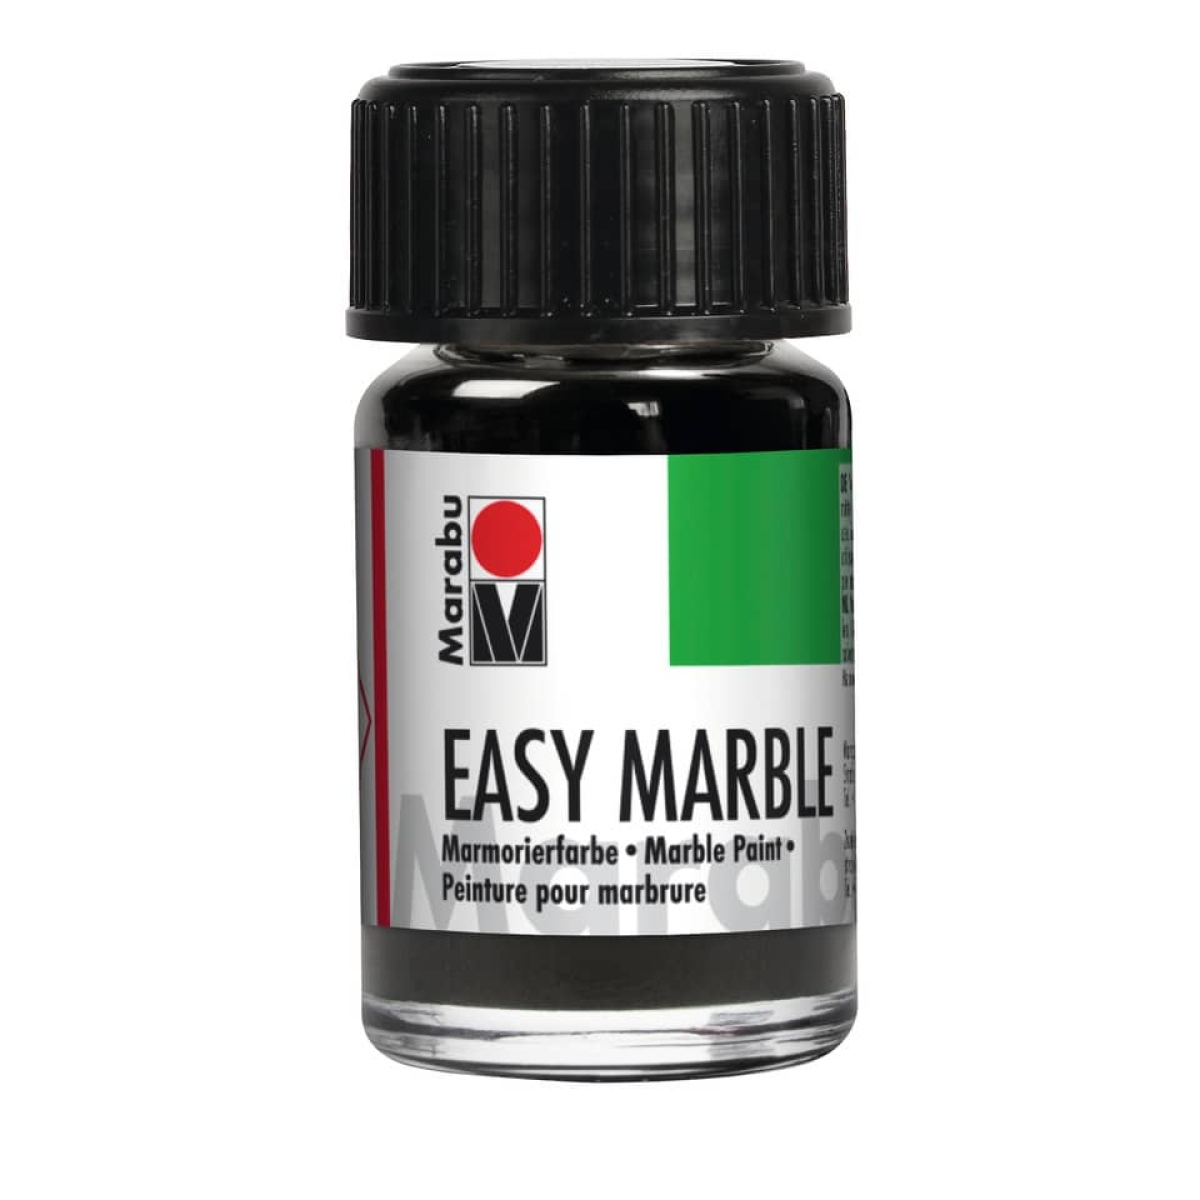 MARABUMarbling paint Easy Marble, 15ml, silver 13050 039 082Article-No: 4007751089052